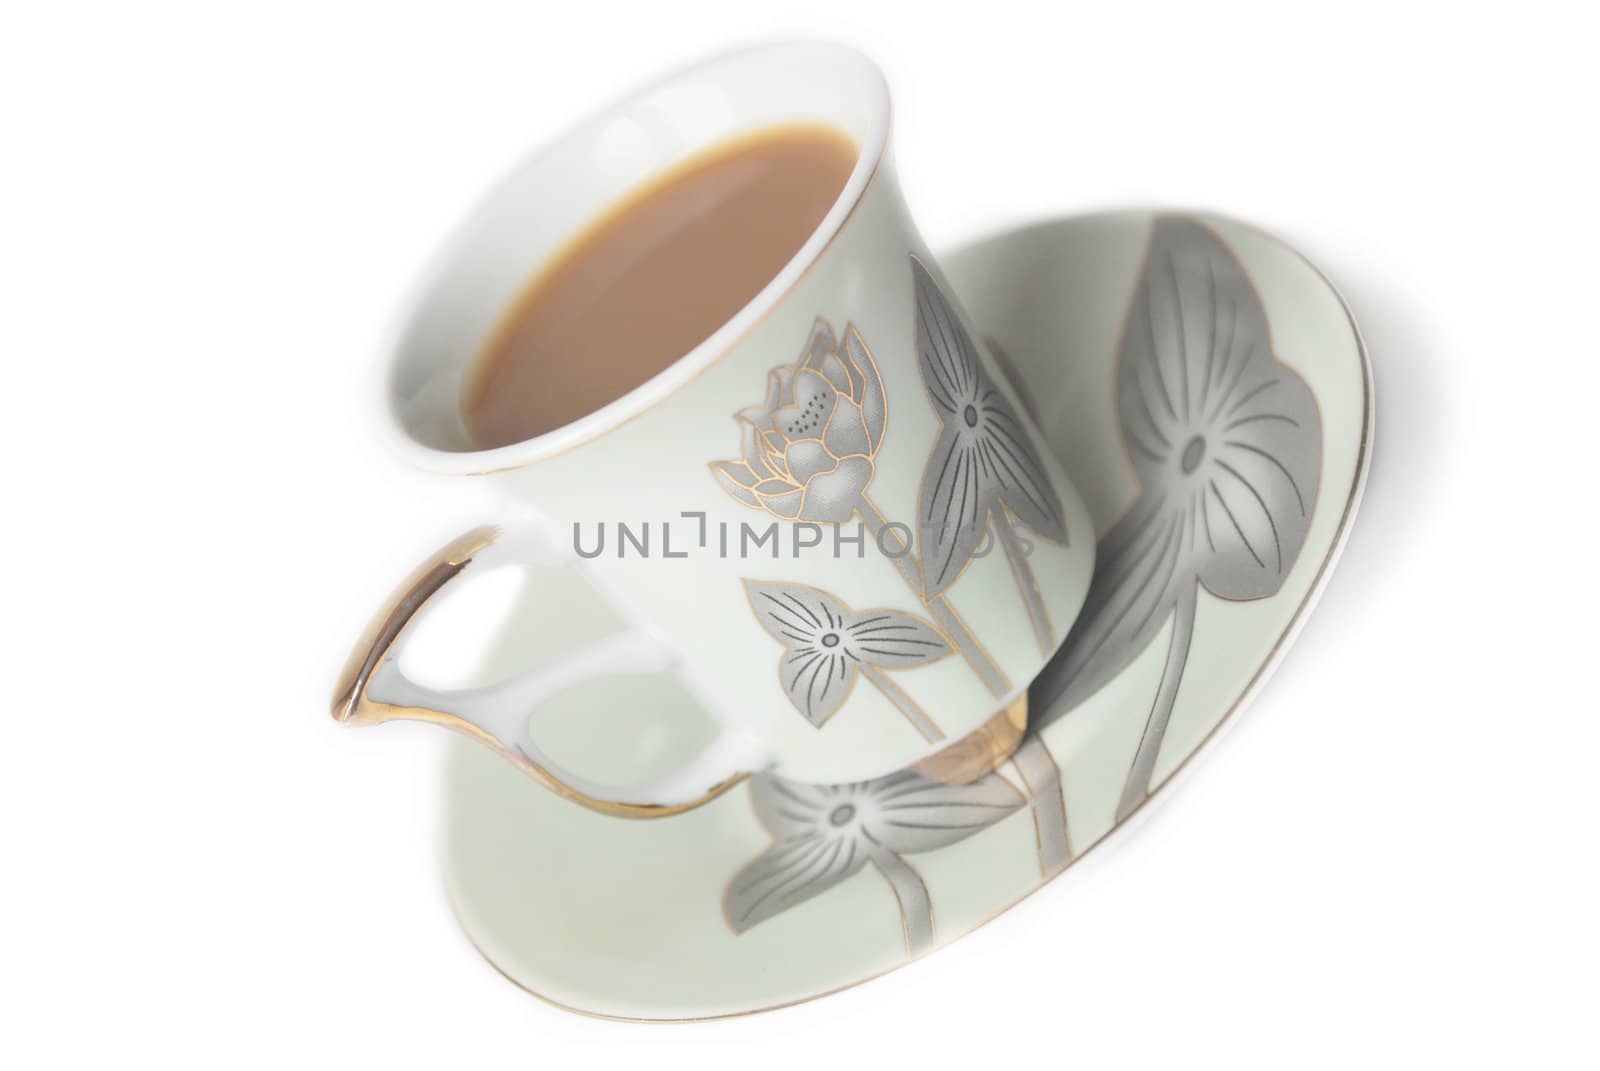 cup of coffee with milk or cream and saucer 